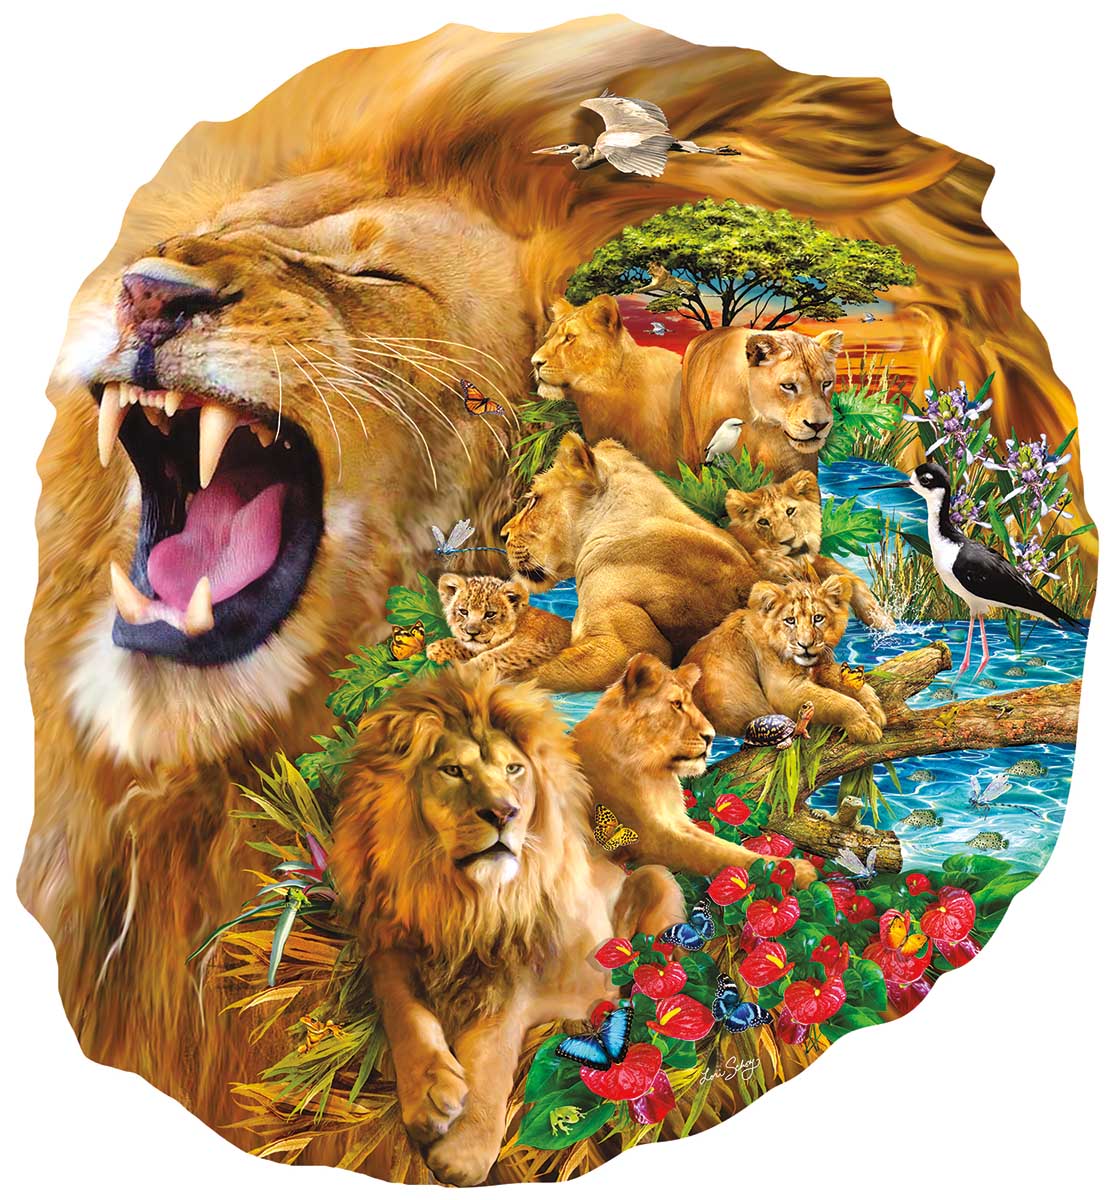 Lion Family Big Cats Shaped Puzzle